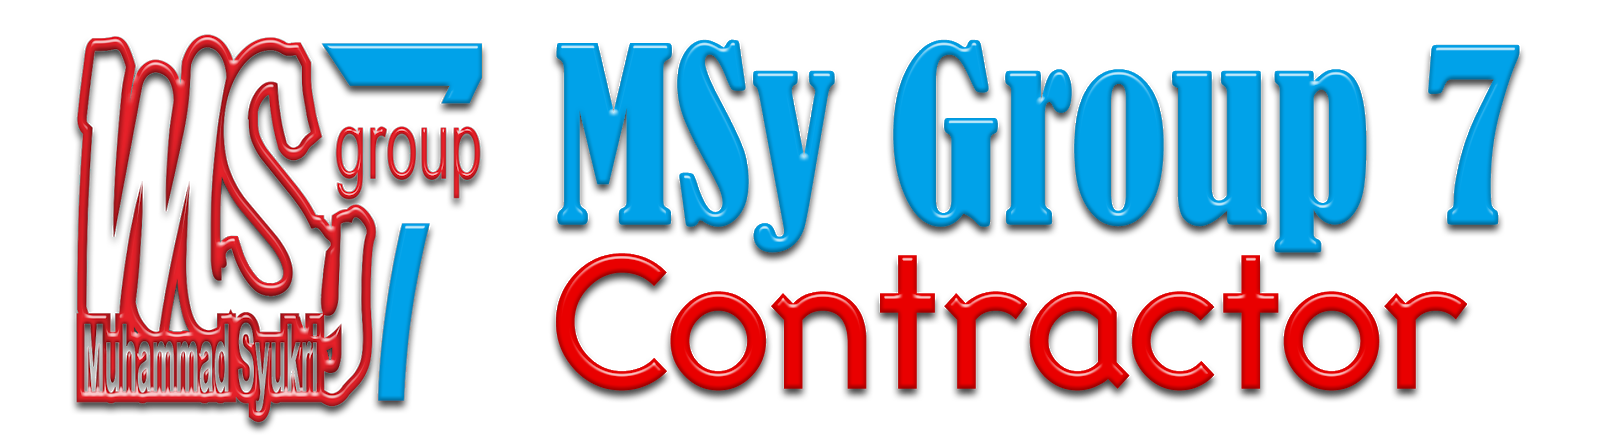 MSy Group 7 Contractor